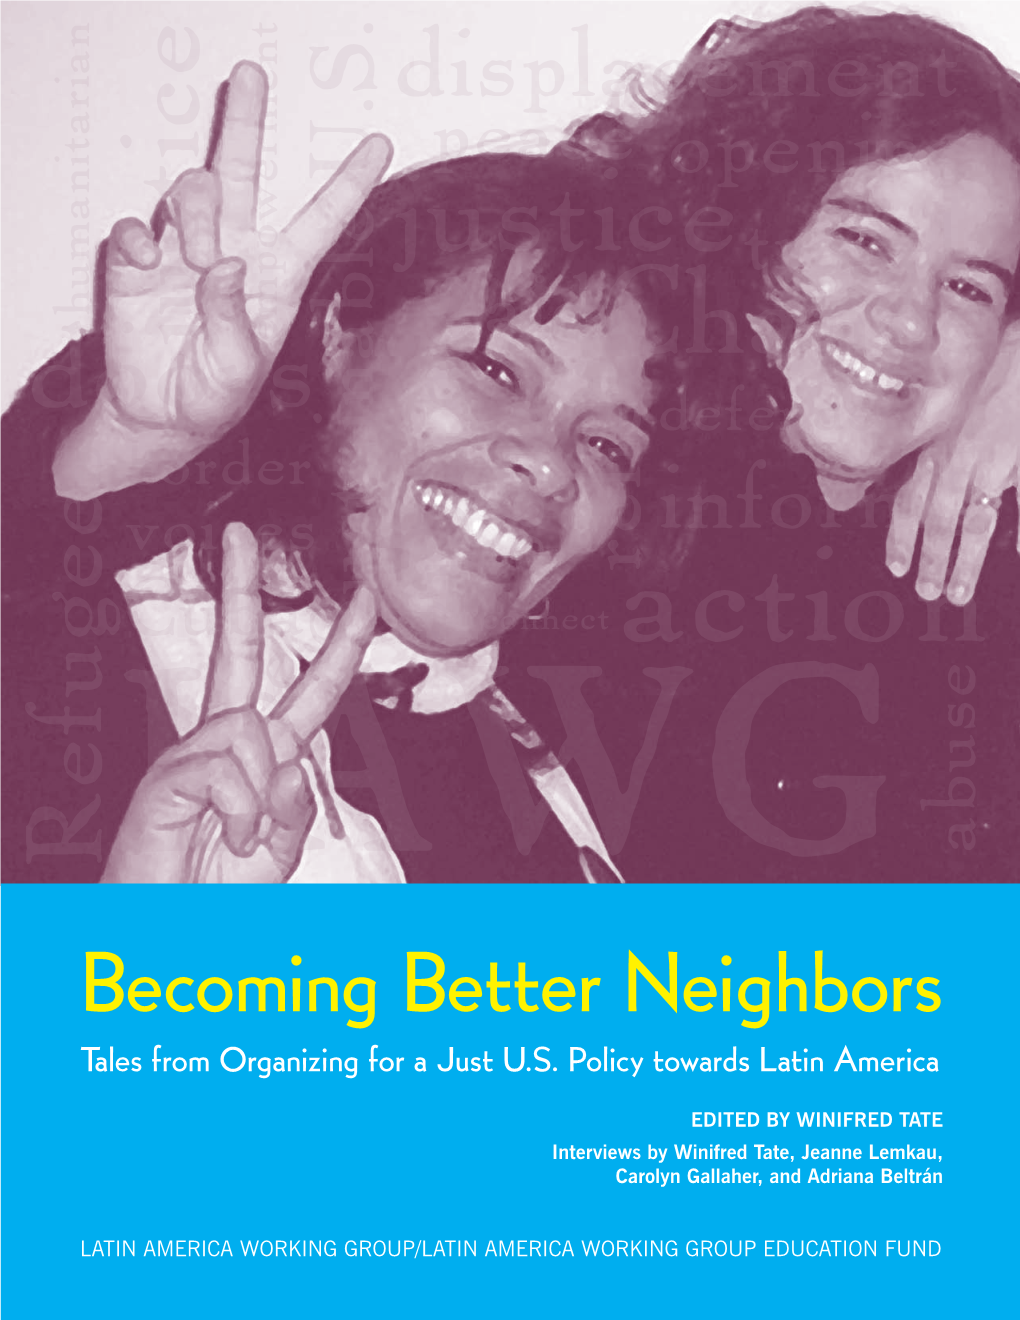 Becoming Better Neighbors Tales from Organizing for a Just U.S